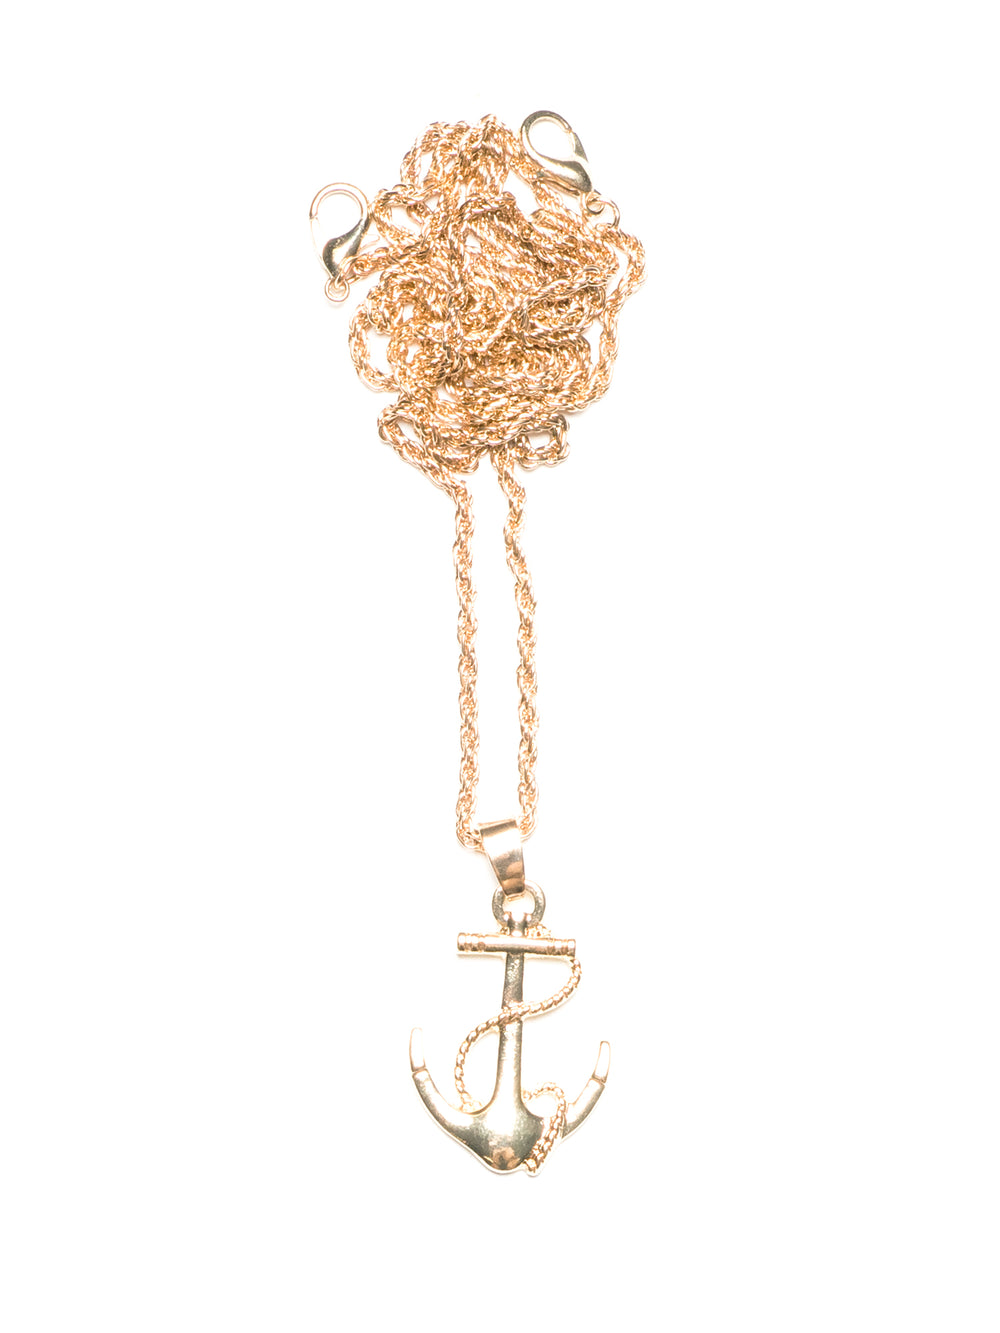 KW FASHION CORP MASK/SG CHAIN - ANCHOR PENDANT - CLEARANCE